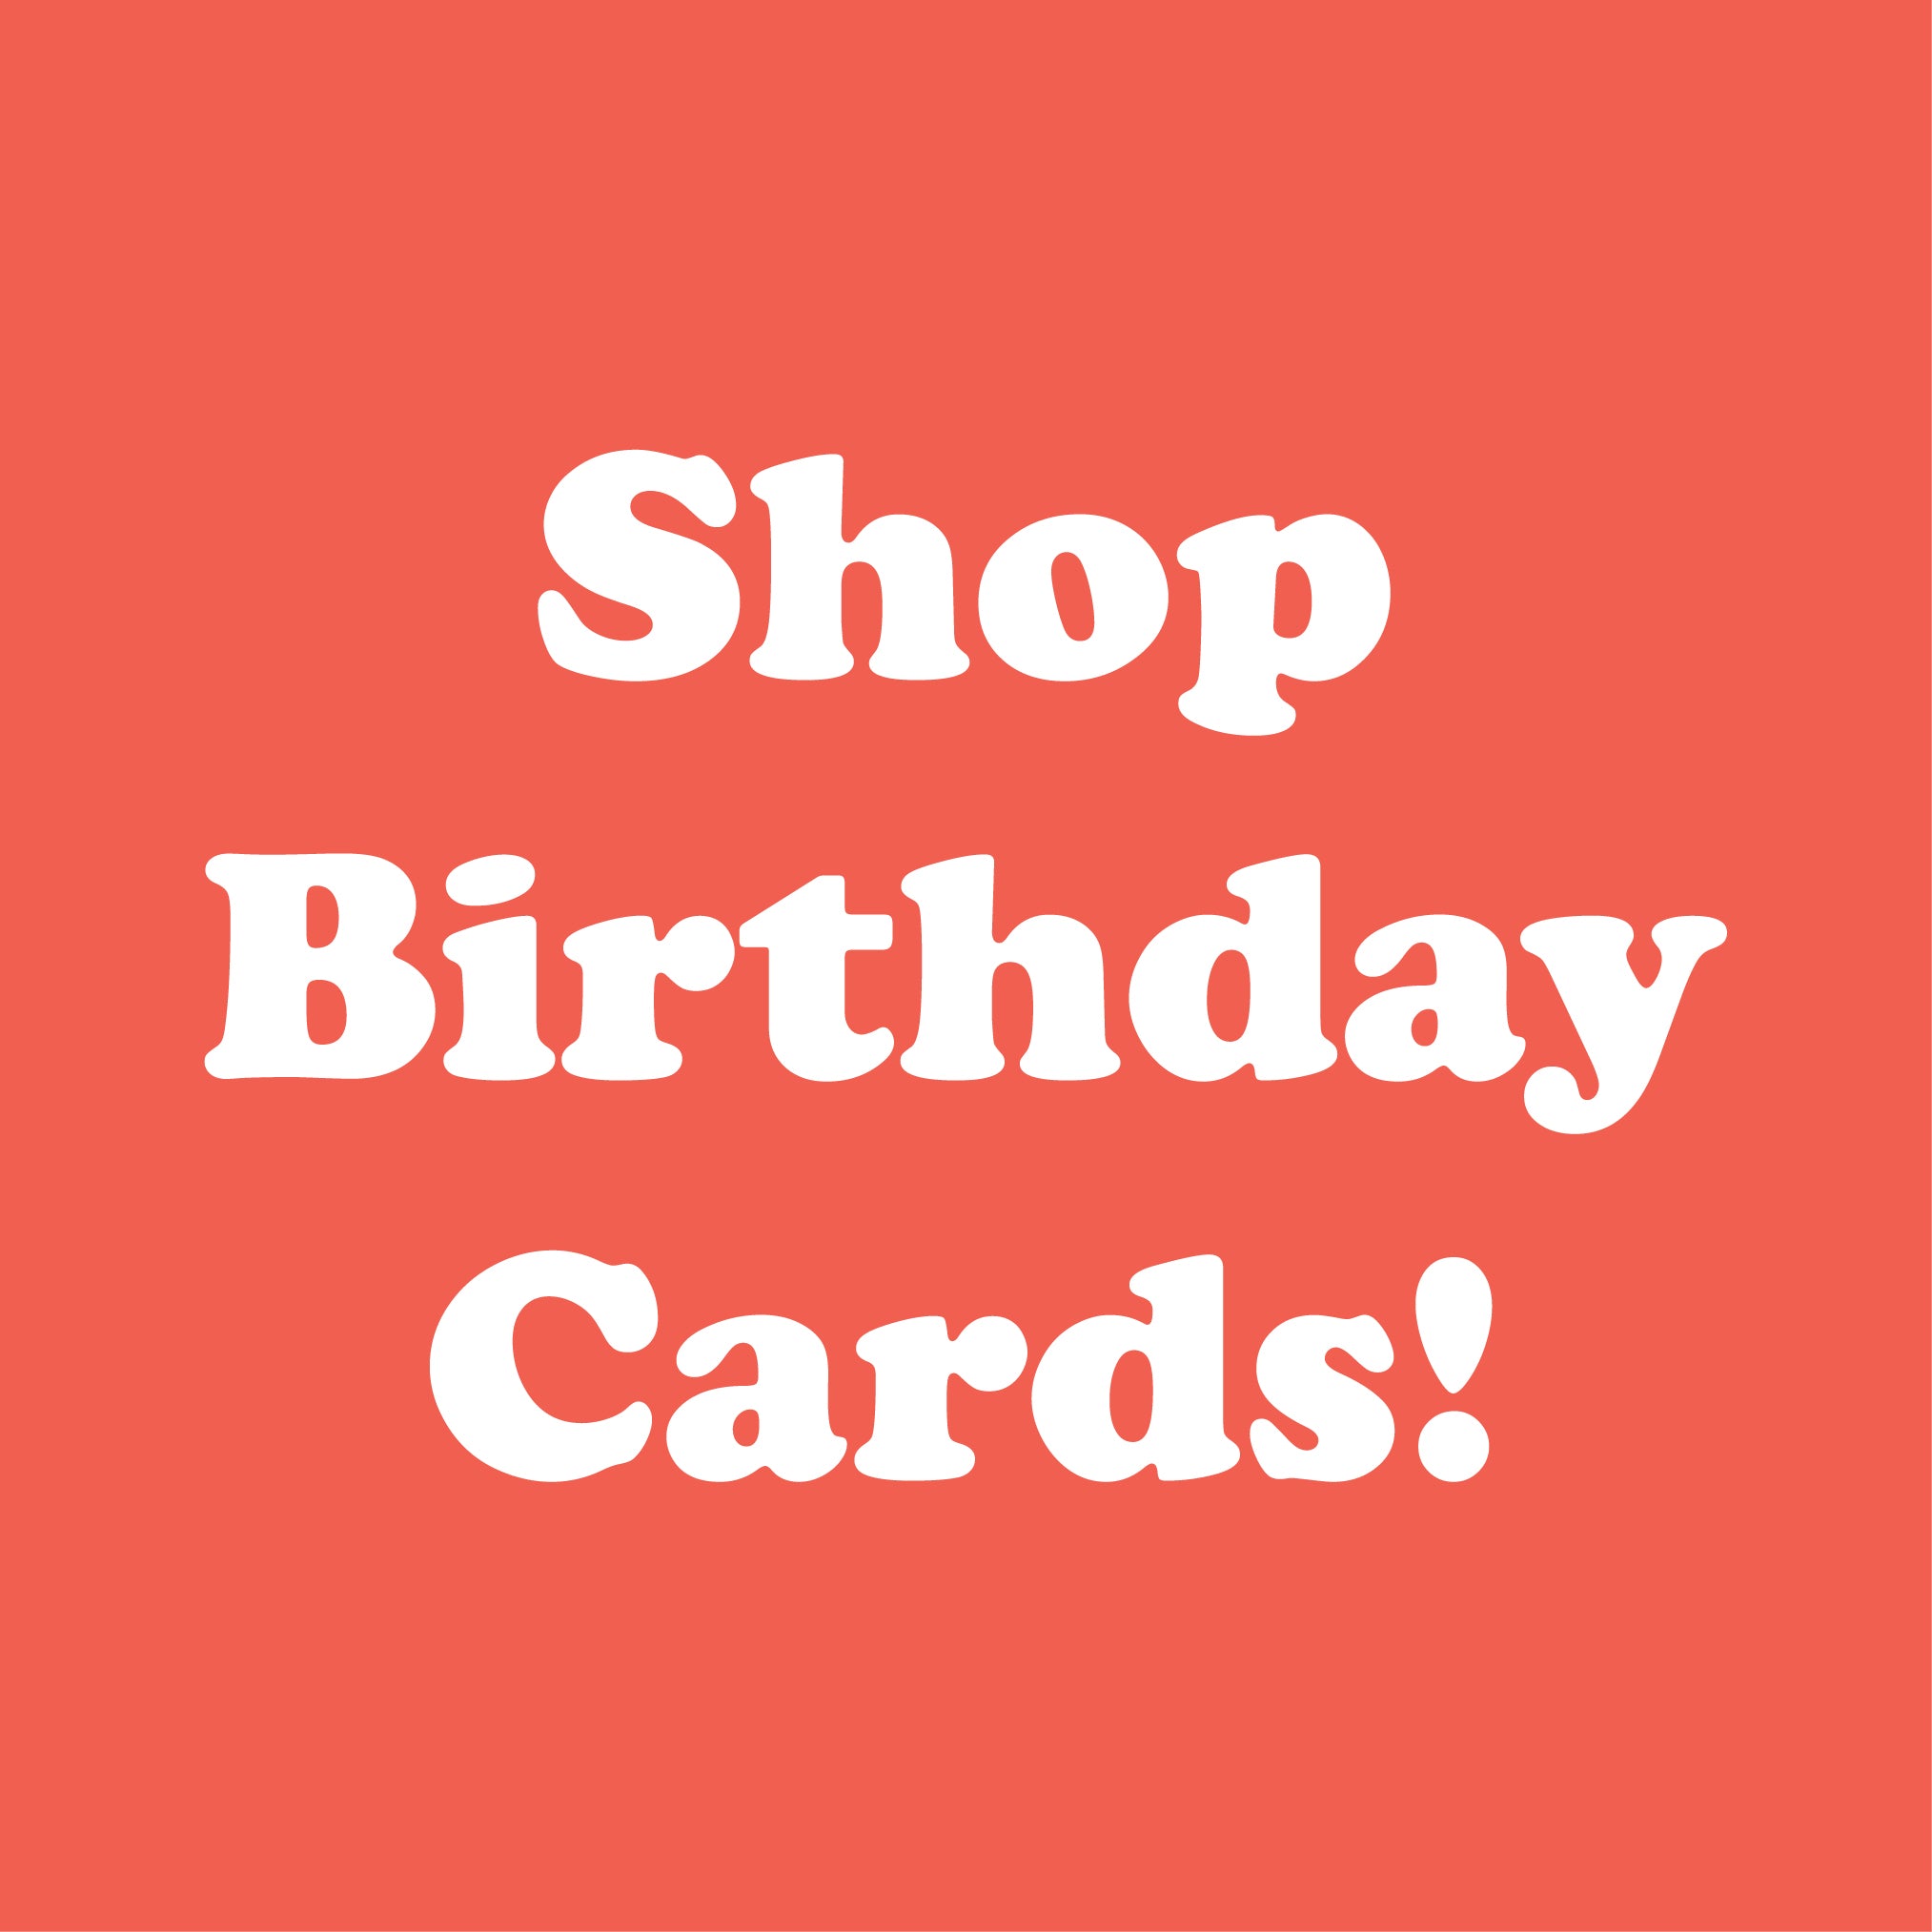 shop birthday cards on red background